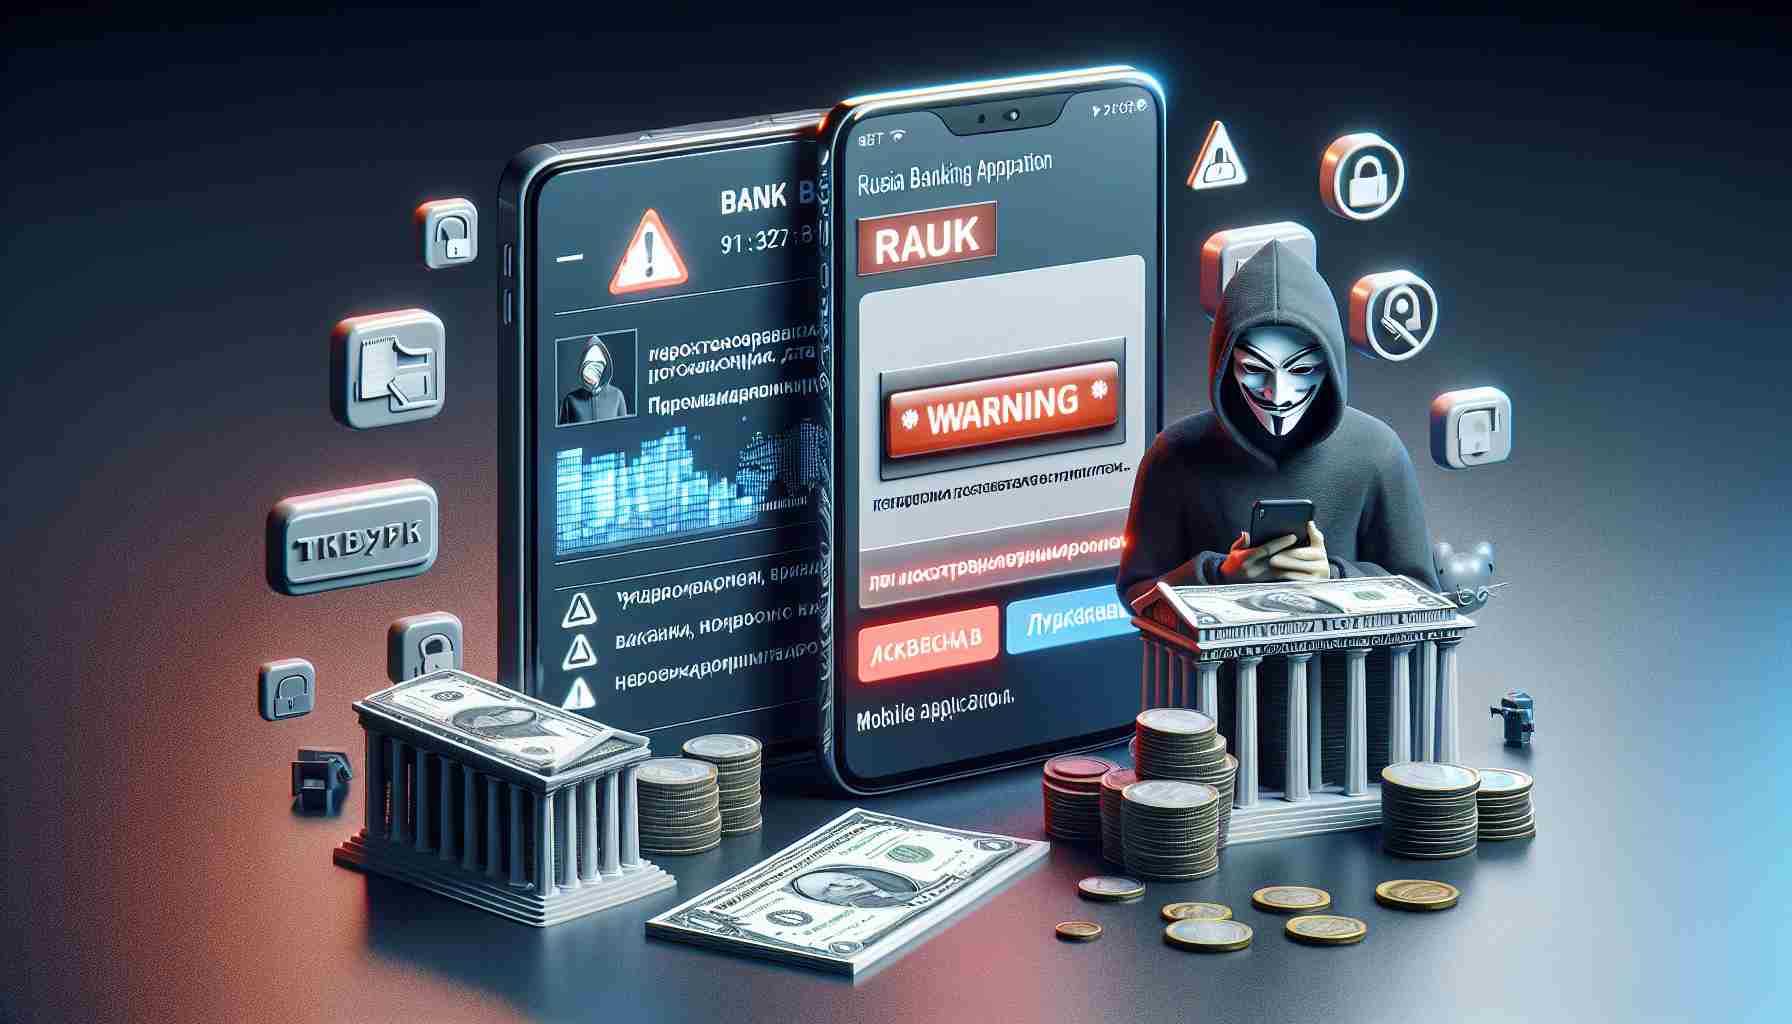 Russian Bank Warns of a New Fraud Tactic Targeting Mobile App Users